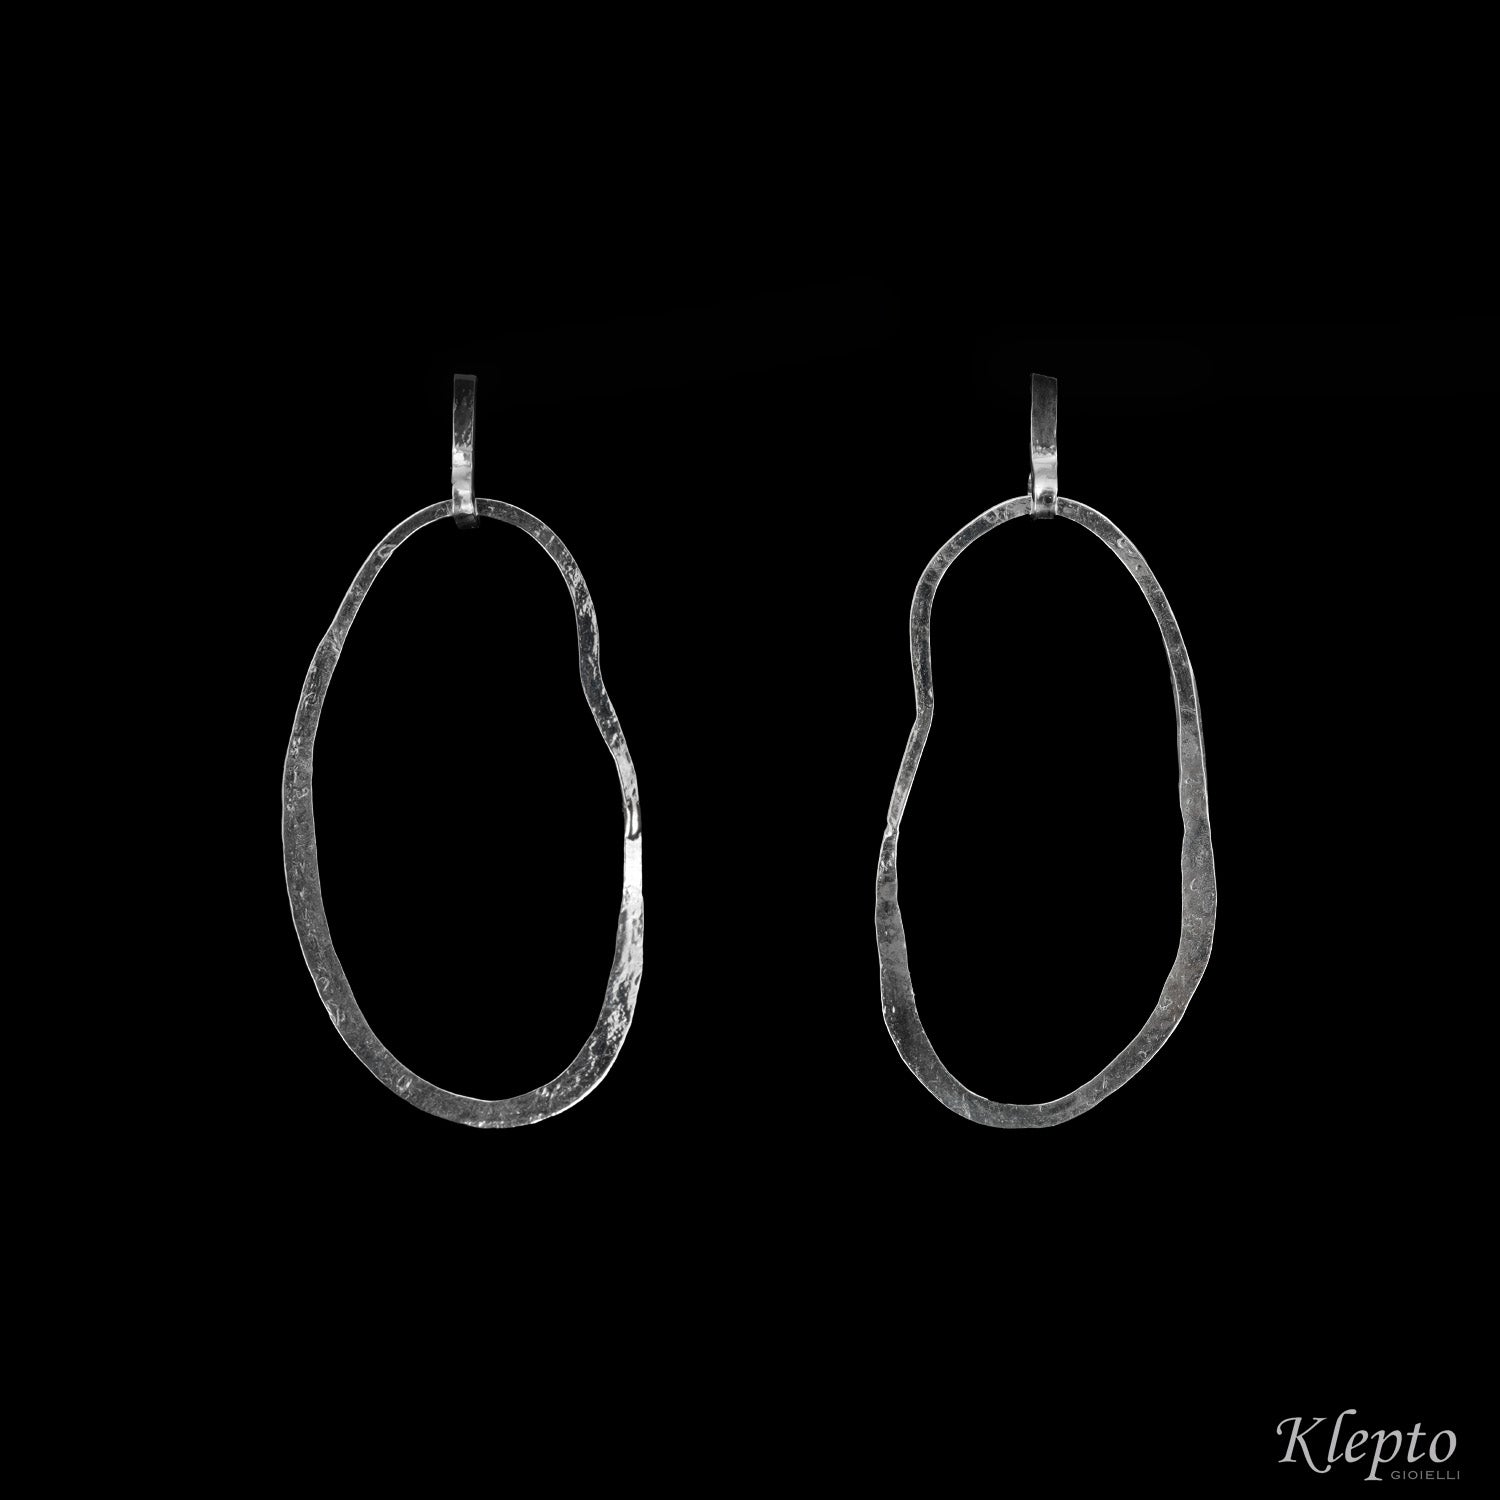 Earrings in Silnova® Silver with hammered wire